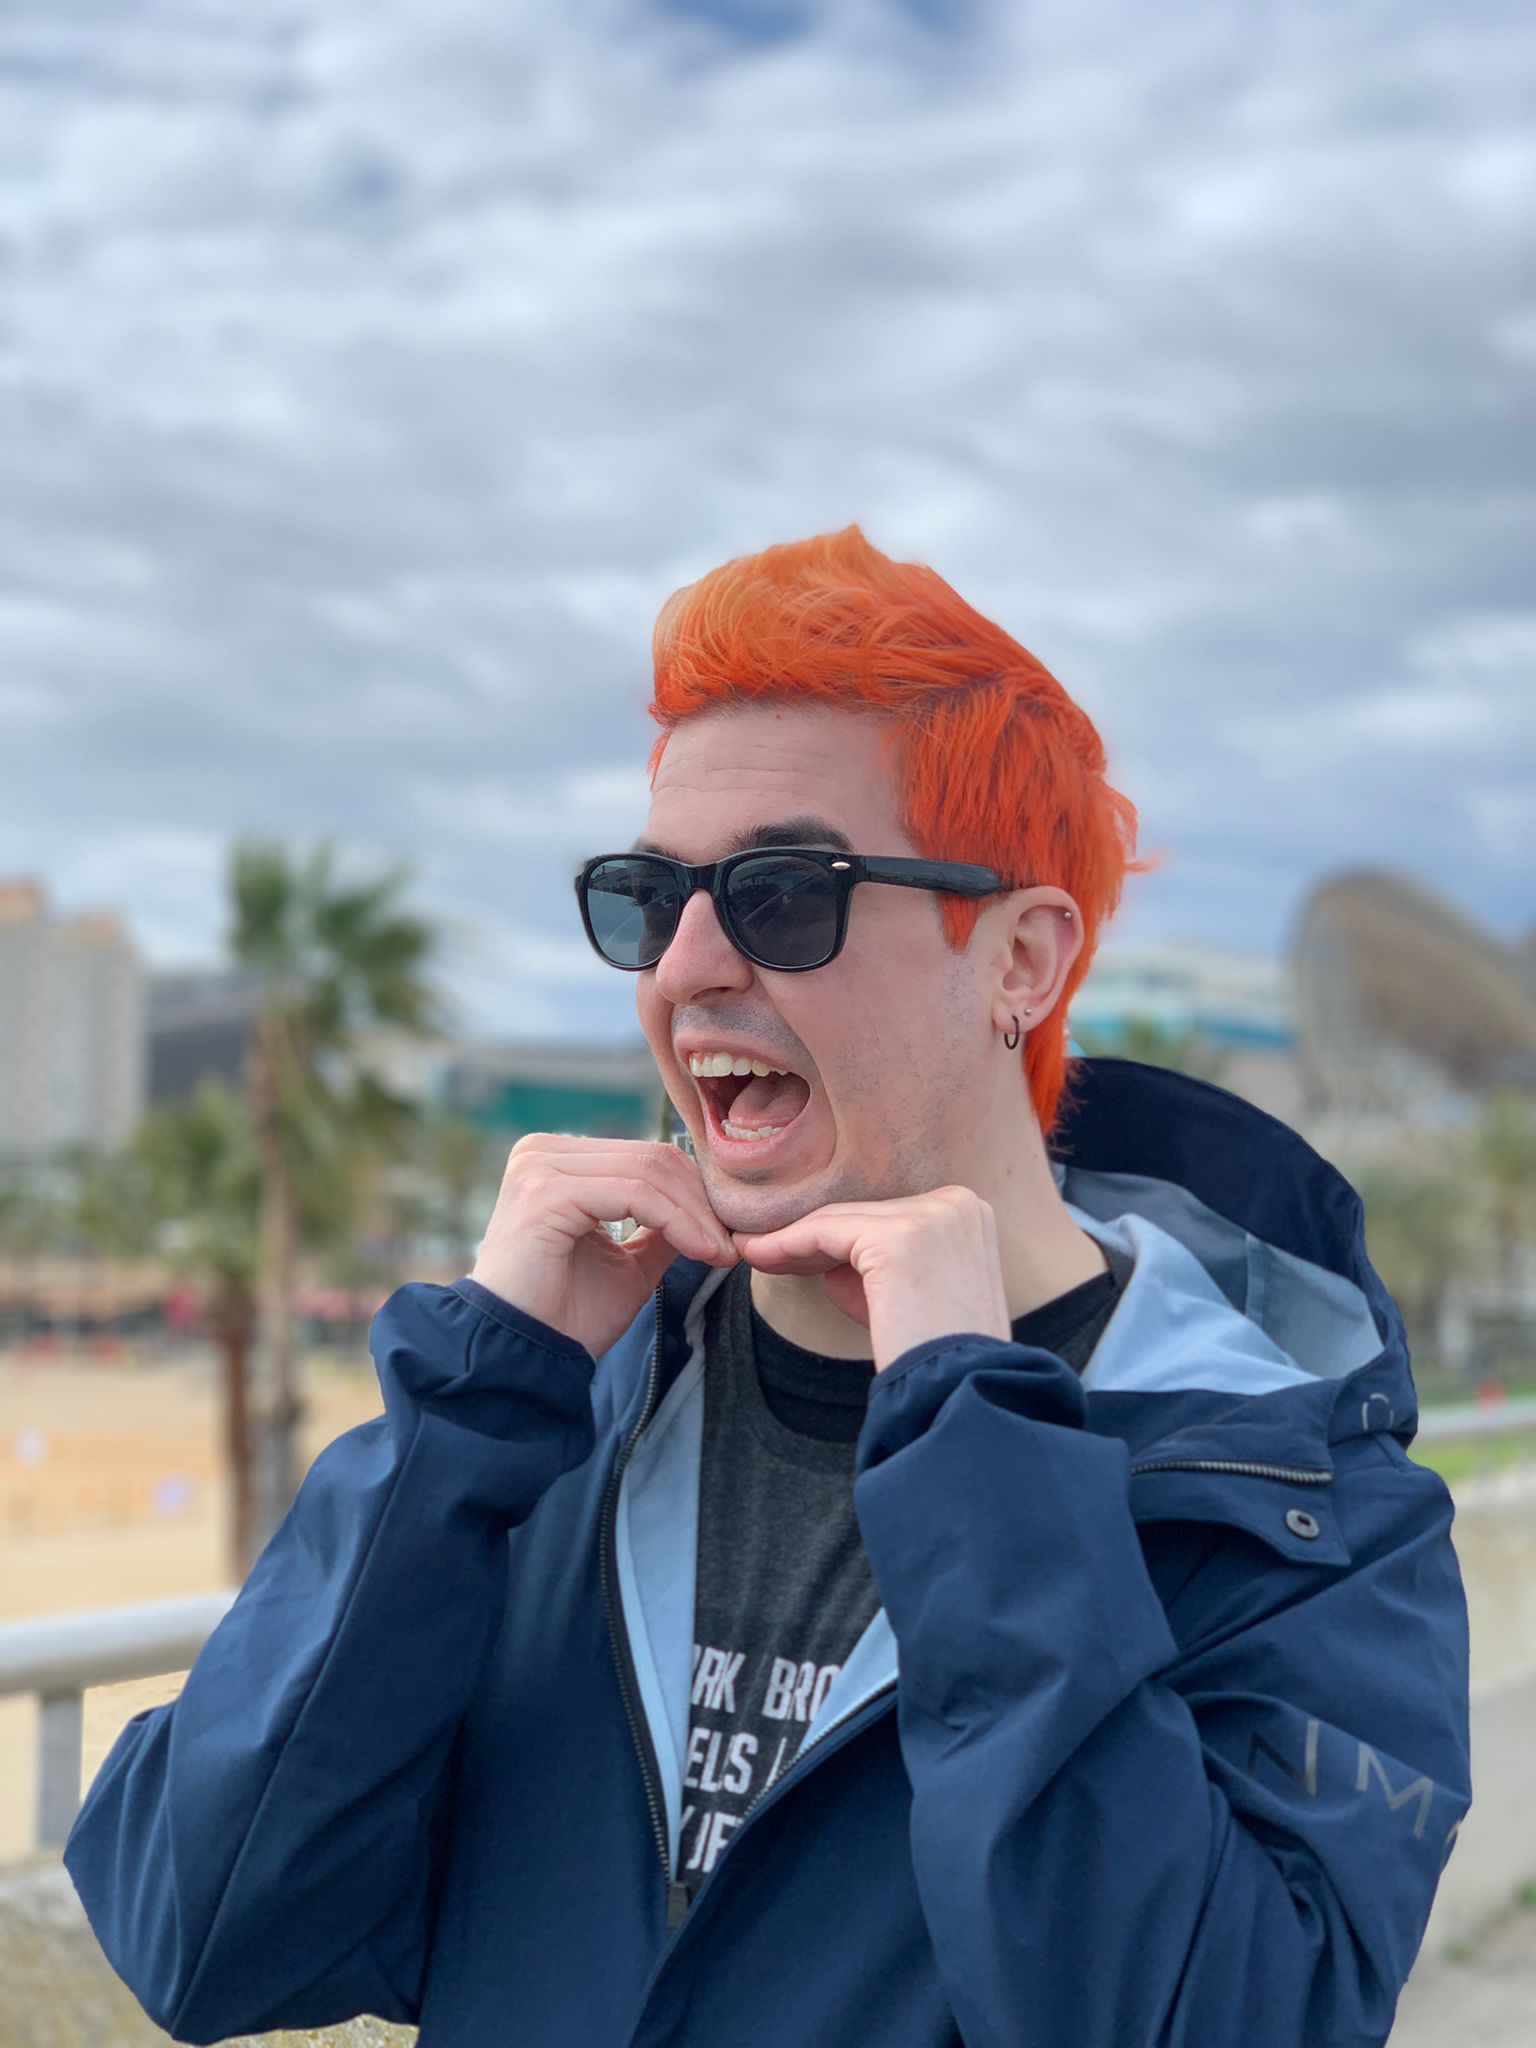 Me with orange hair in Barcelona